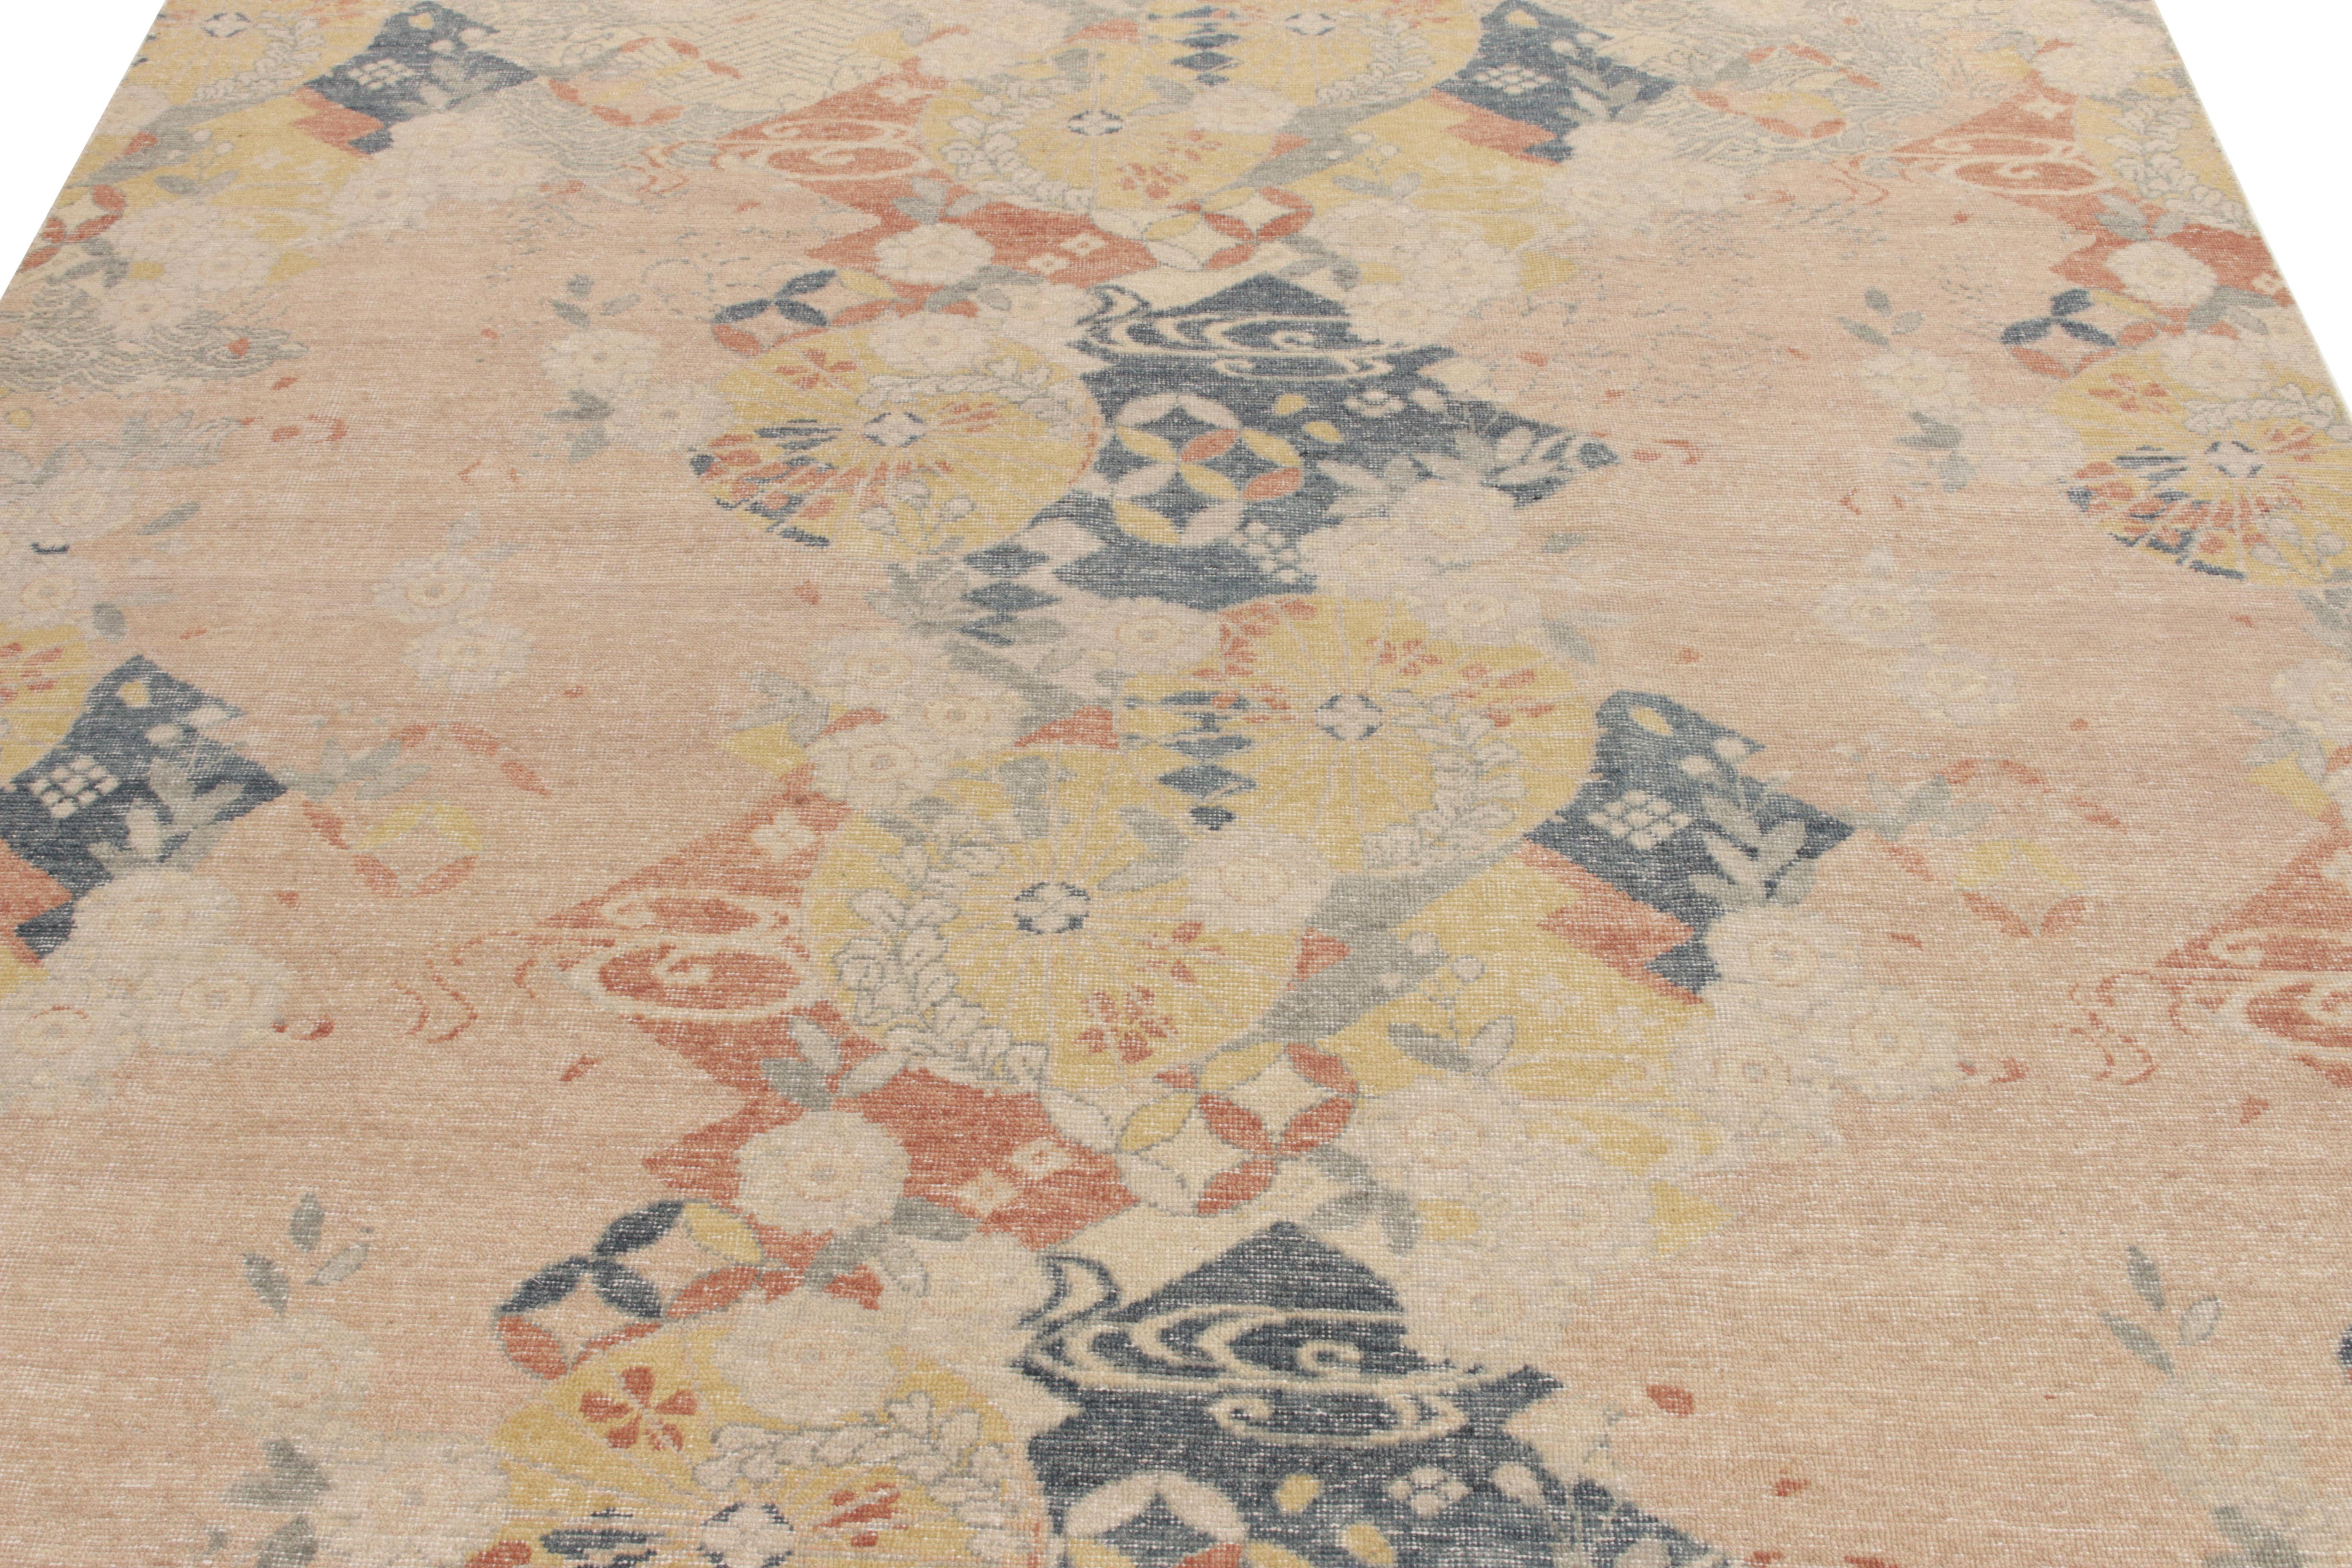 Indian Rug & Kilim's Distressed Japanese Deco Style Rug in Blue, Pink All over Pattern For Sale